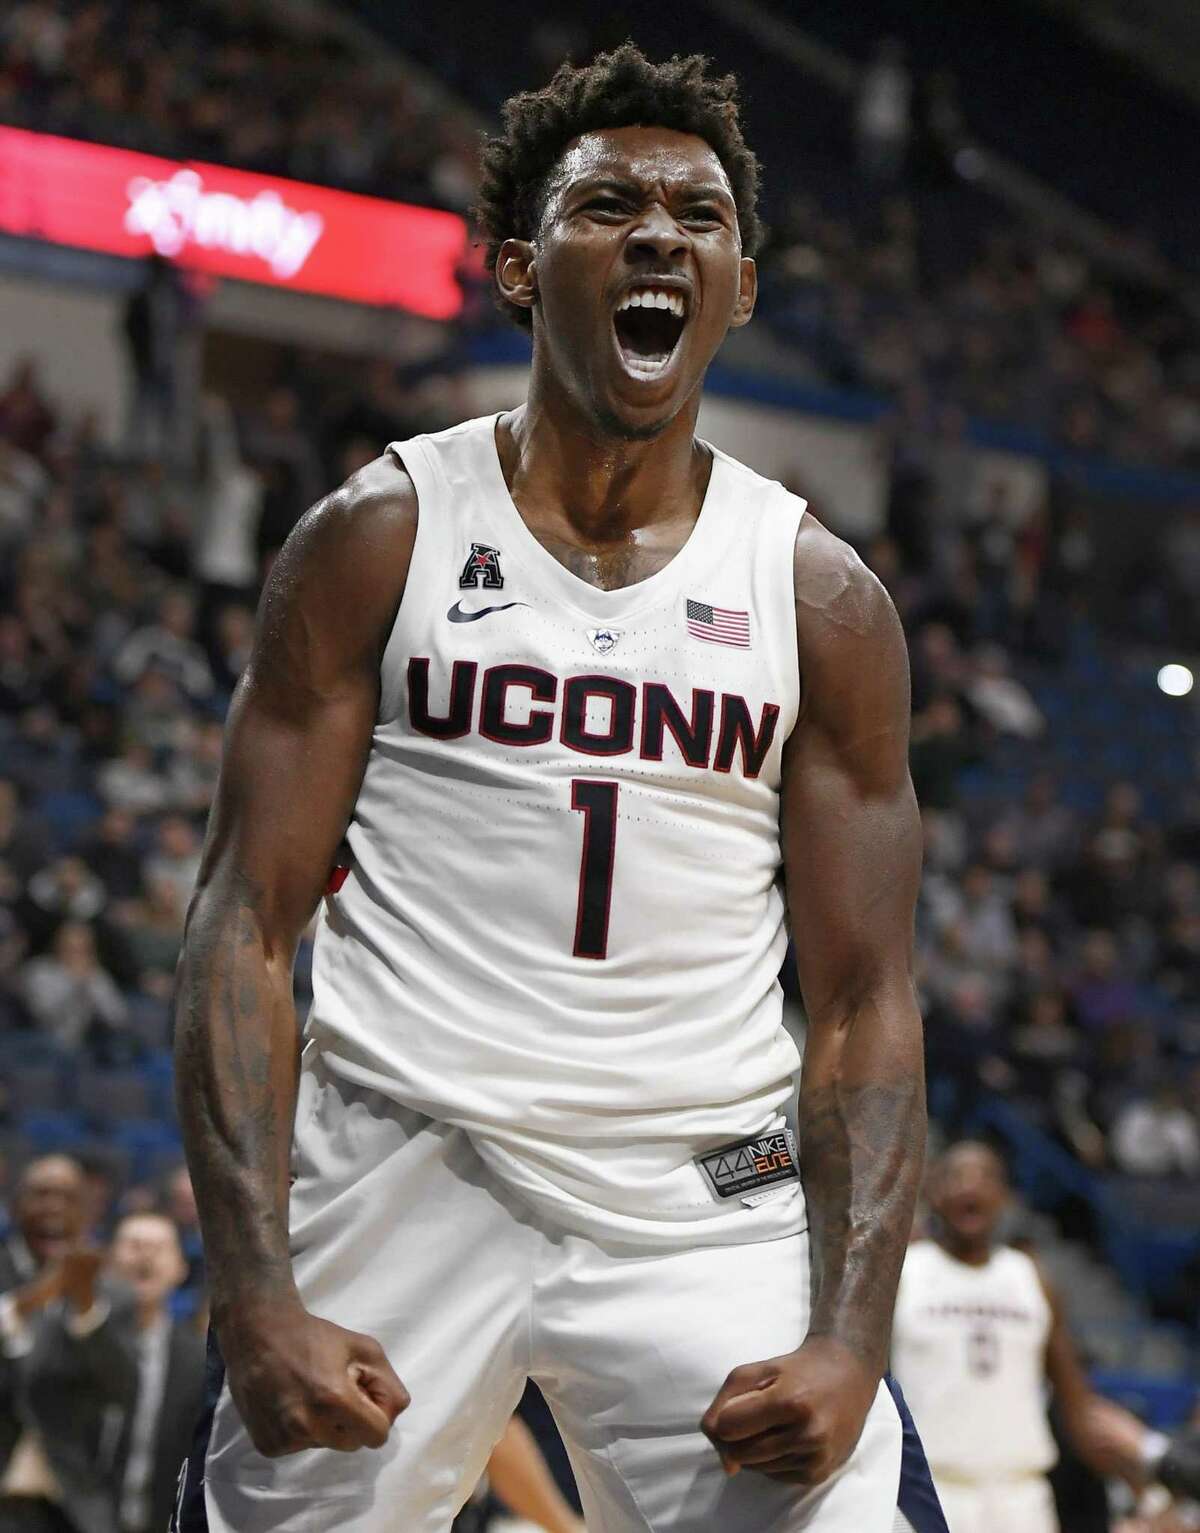 Christian Vital and the UConn men’s basketball team hosts New Hampshire on Saturday at the XL Center in Hartford.